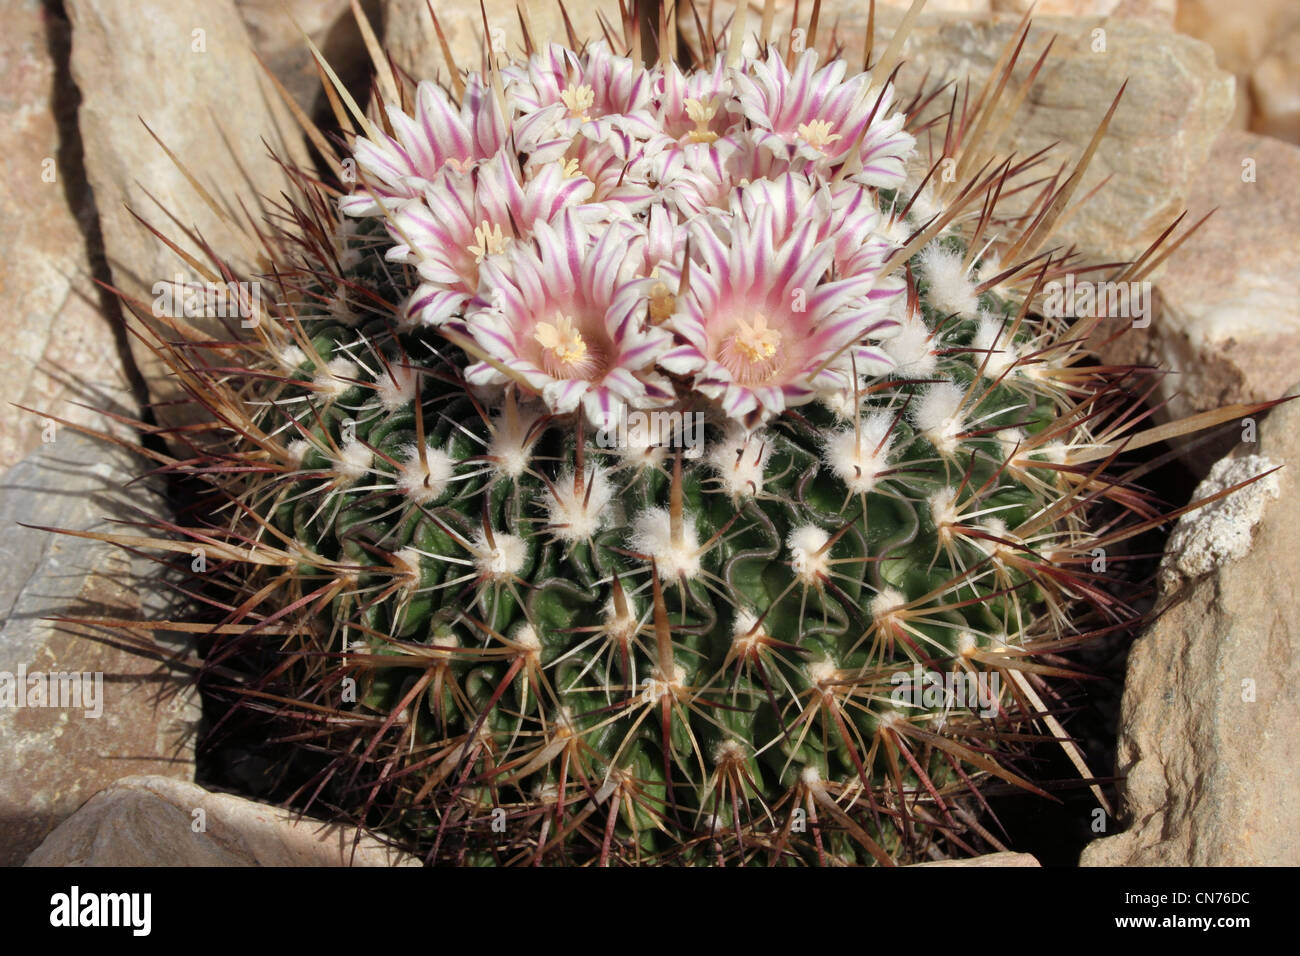 Cactus (Stenocactus species) grown from seed from Pachuca, Hidalgo, Mexico, CH257. Stock Photo